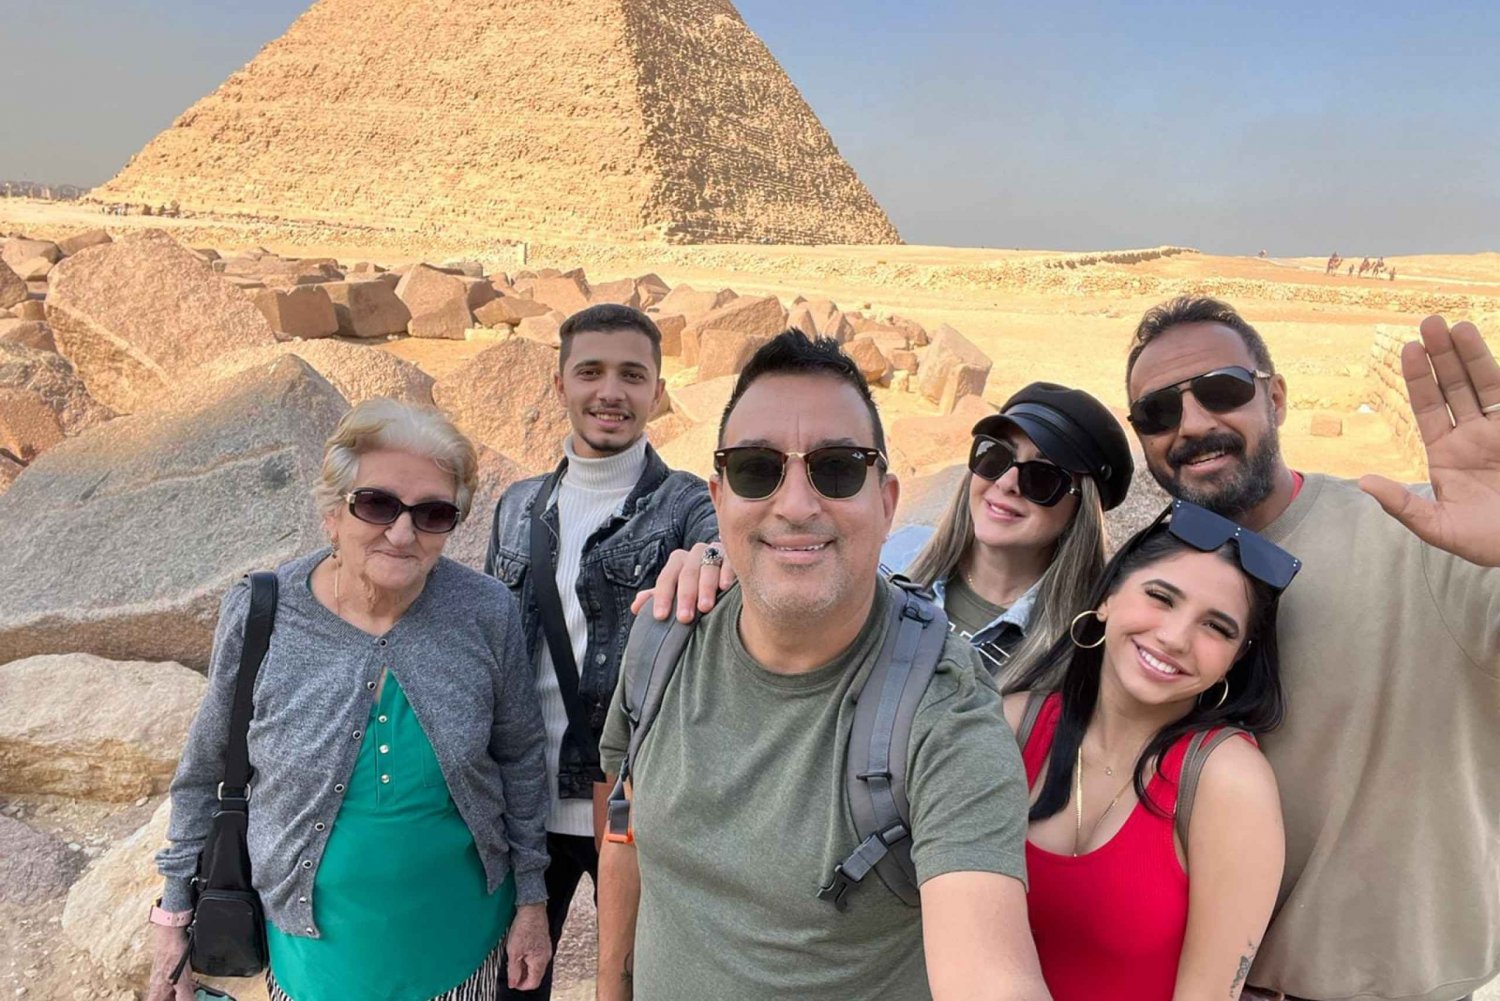 Excellent tour seeing the pyramids and the Sphinx